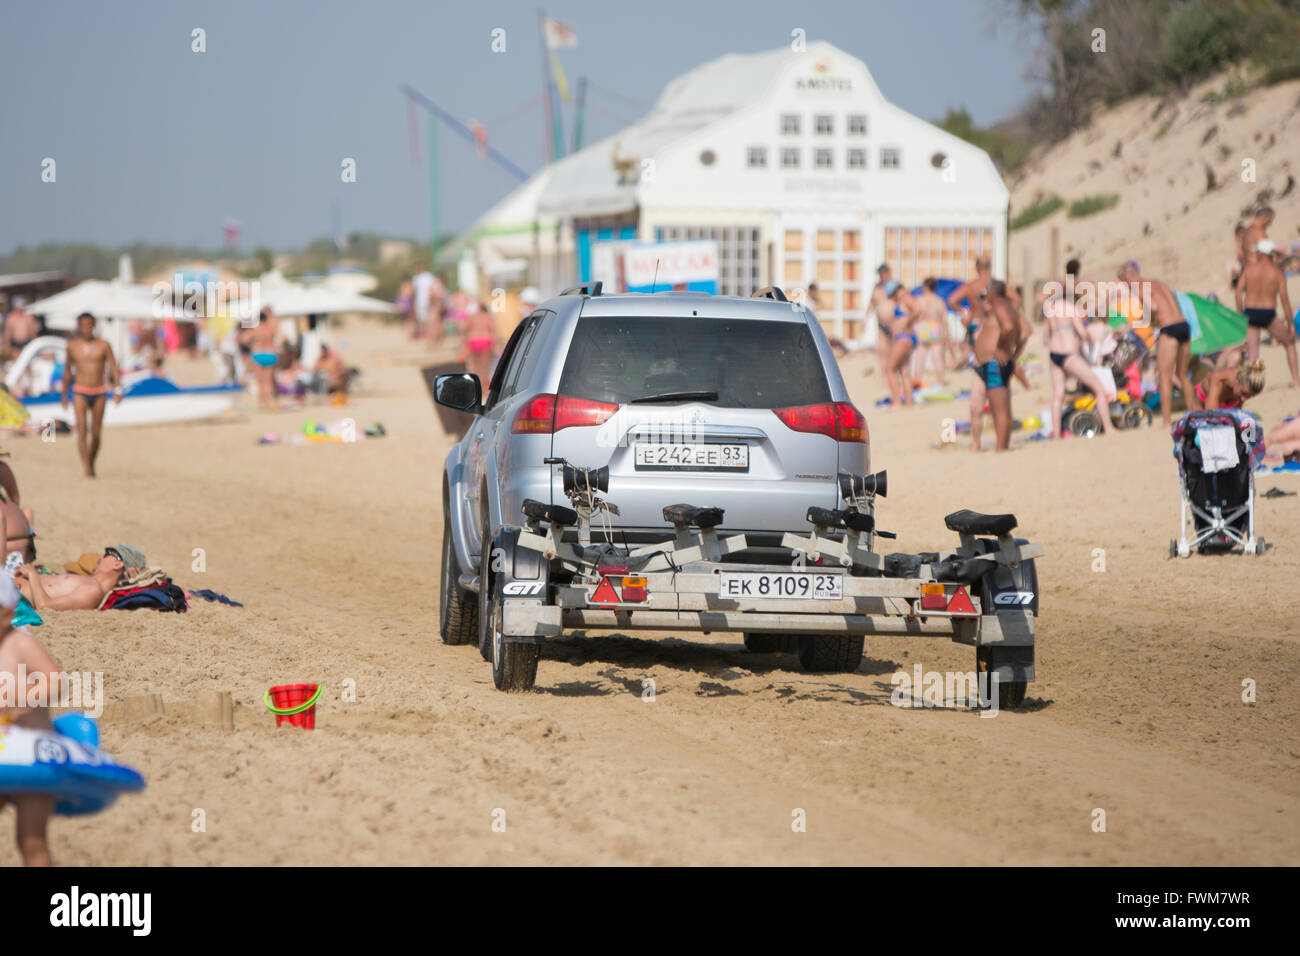 Anapa, Russia - September 20, 2015: passenger car with a trailer, riding on the beach with holidaymakers Stock Photo